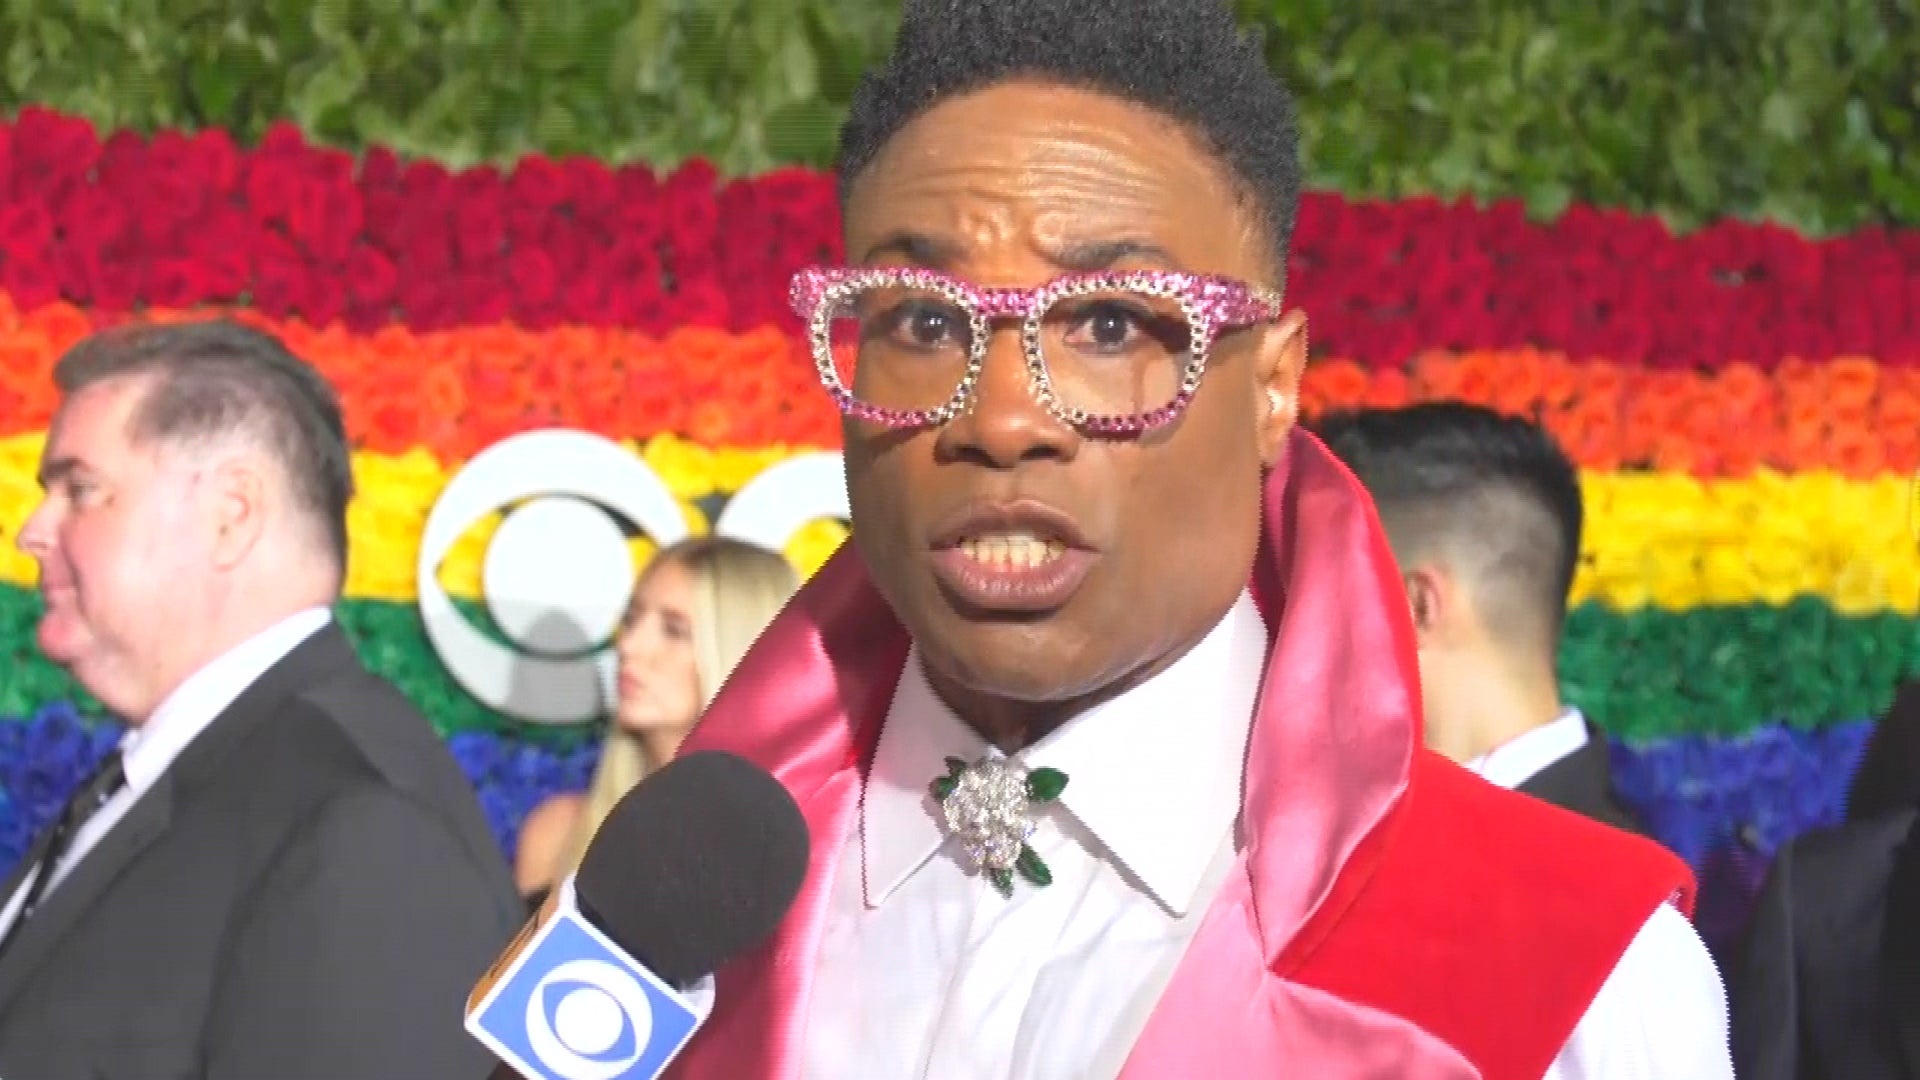 Billy Porter on the Joy of Heels and His Inclusive New Shoe